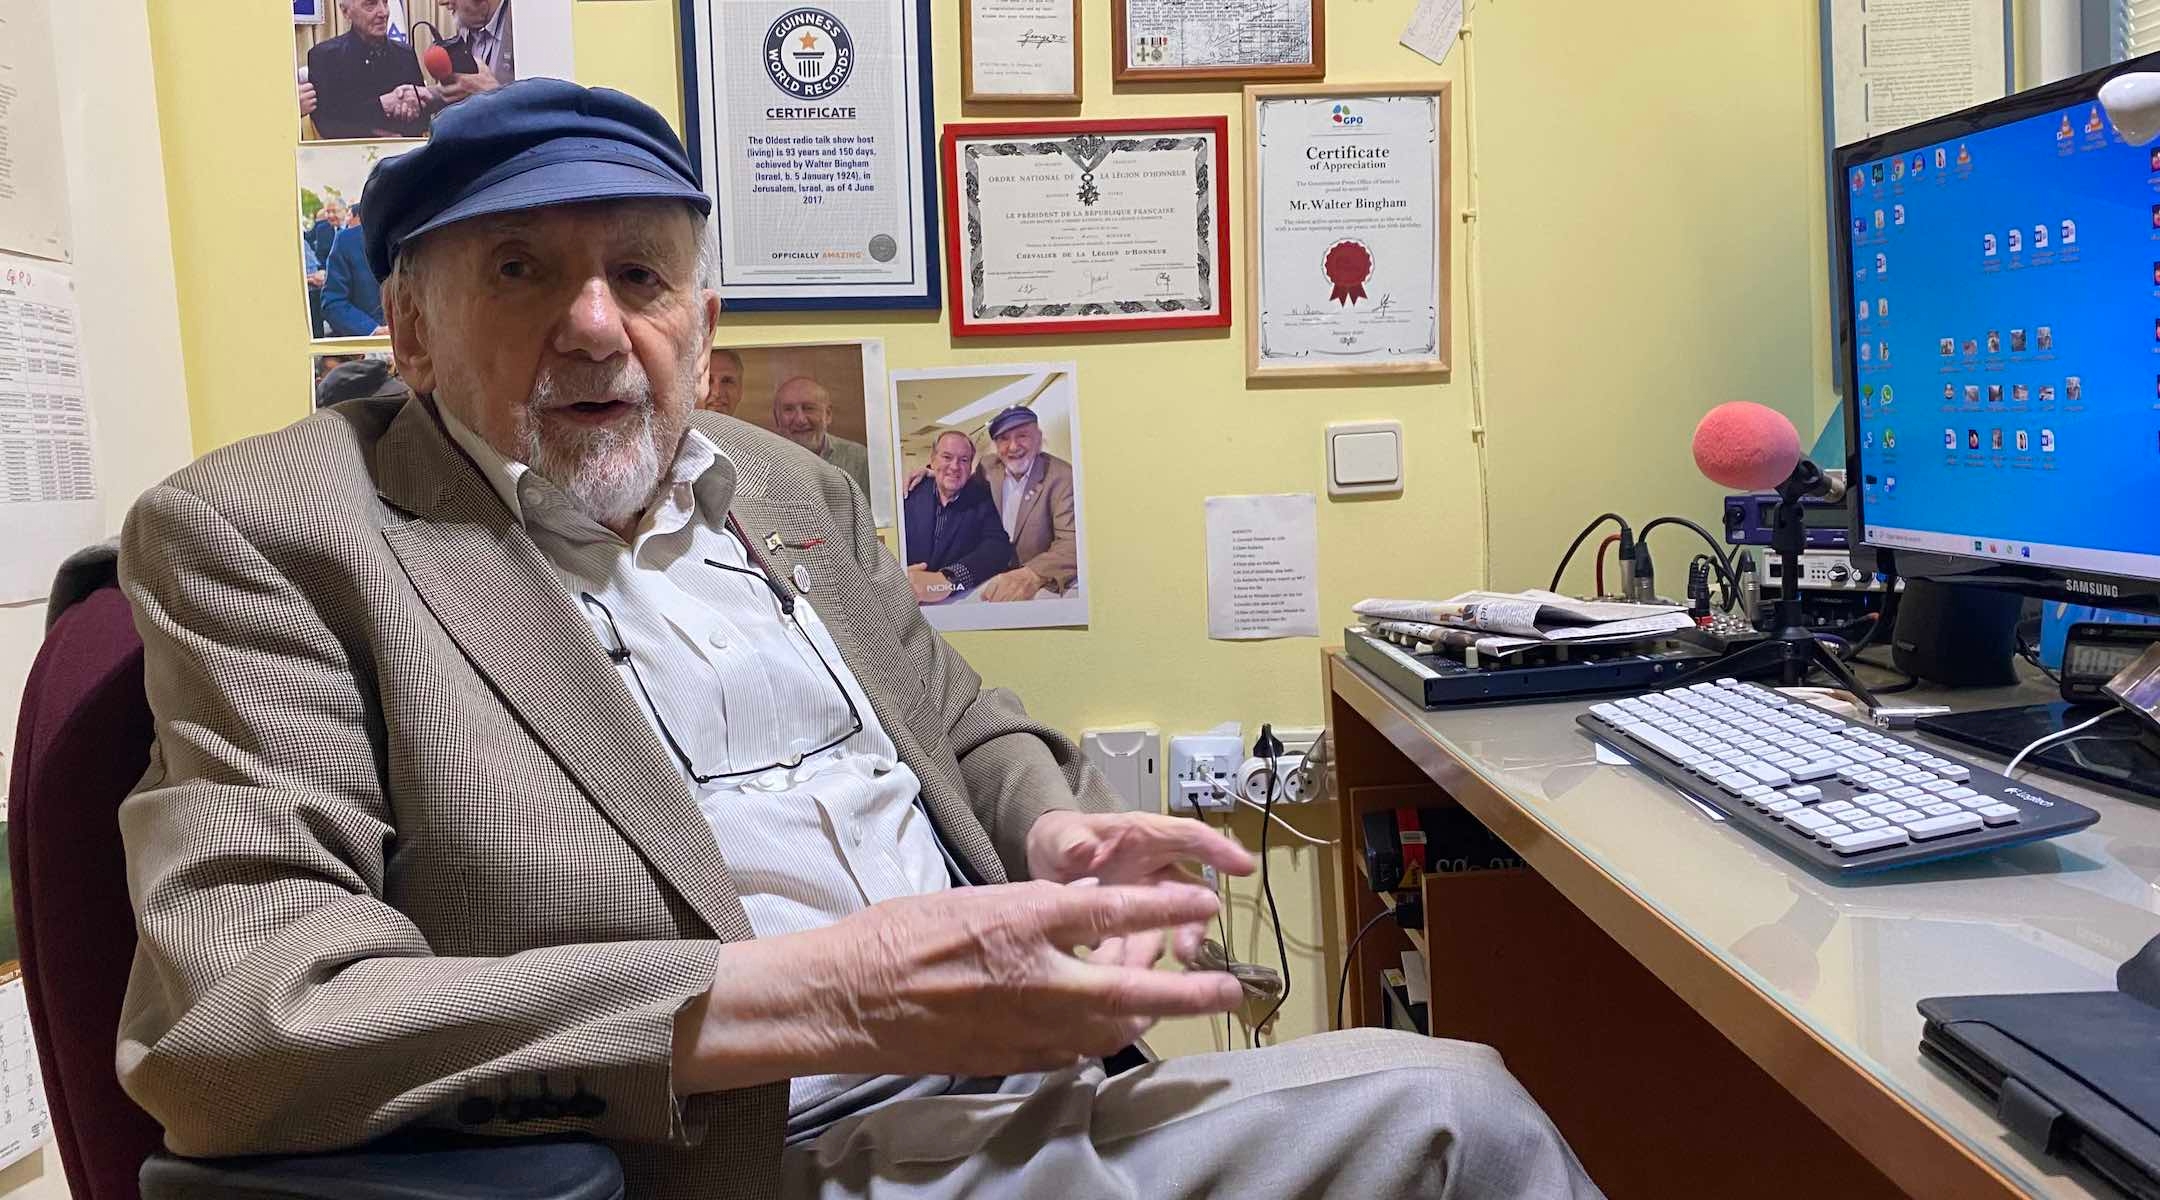 Walter Bingham, a 97-year-old radio journalist, sitting in his office behind a wall filled with memorabilia, including a telegram regarding an award he won from the United Kingdom's King George VI. (Sam Sokol)